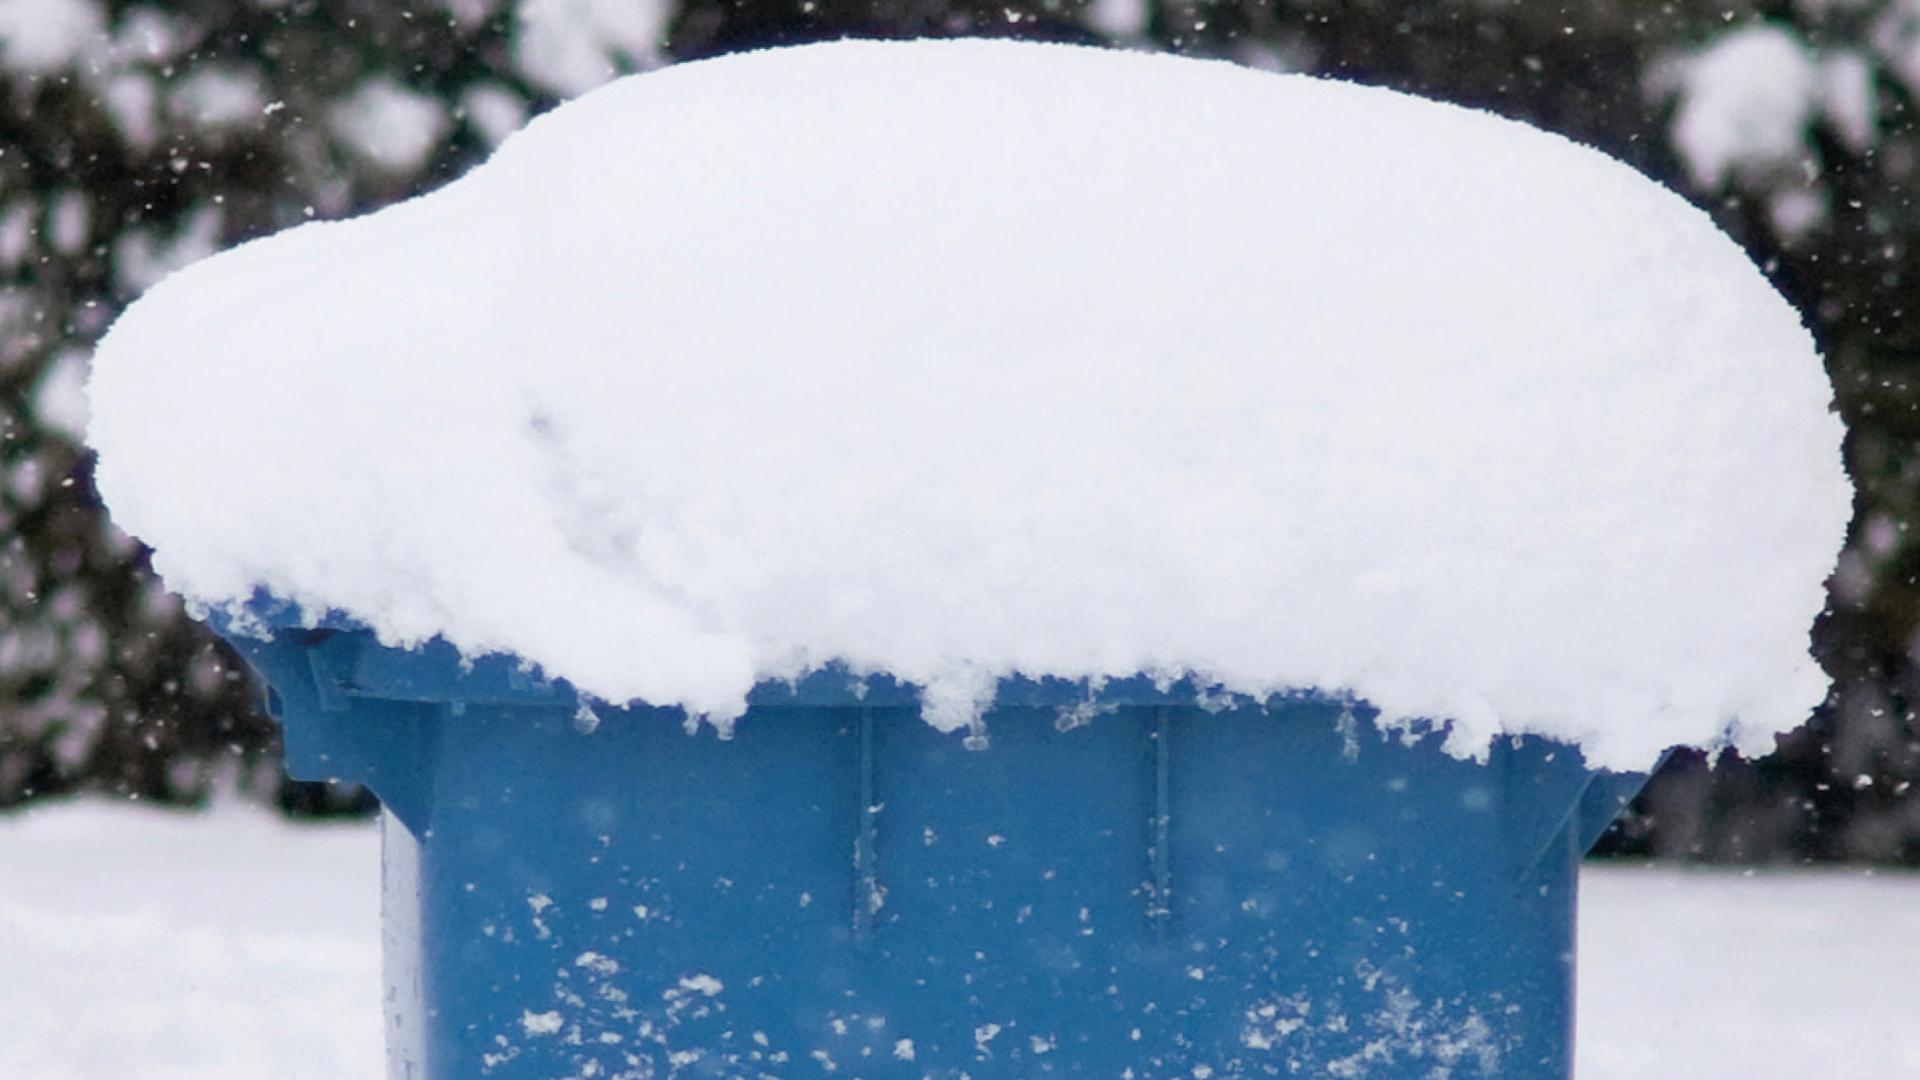 Wheelie bin topped with a heavy layer of snow